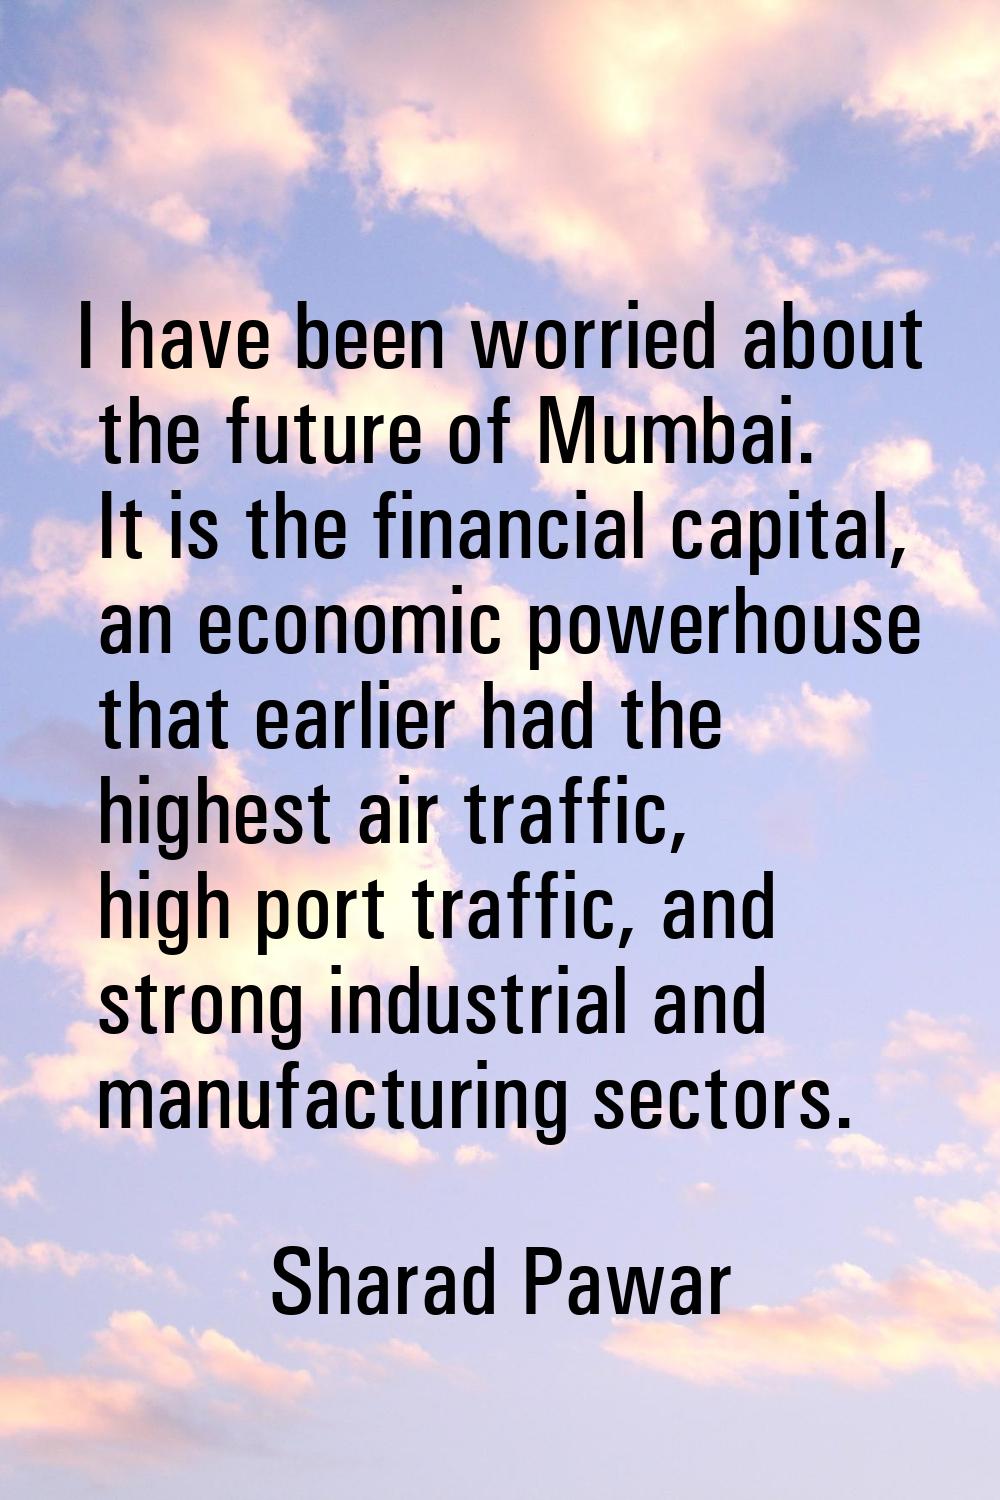 I have been worried about the future of Mumbai. It is the financial capital, an economic powerhouse